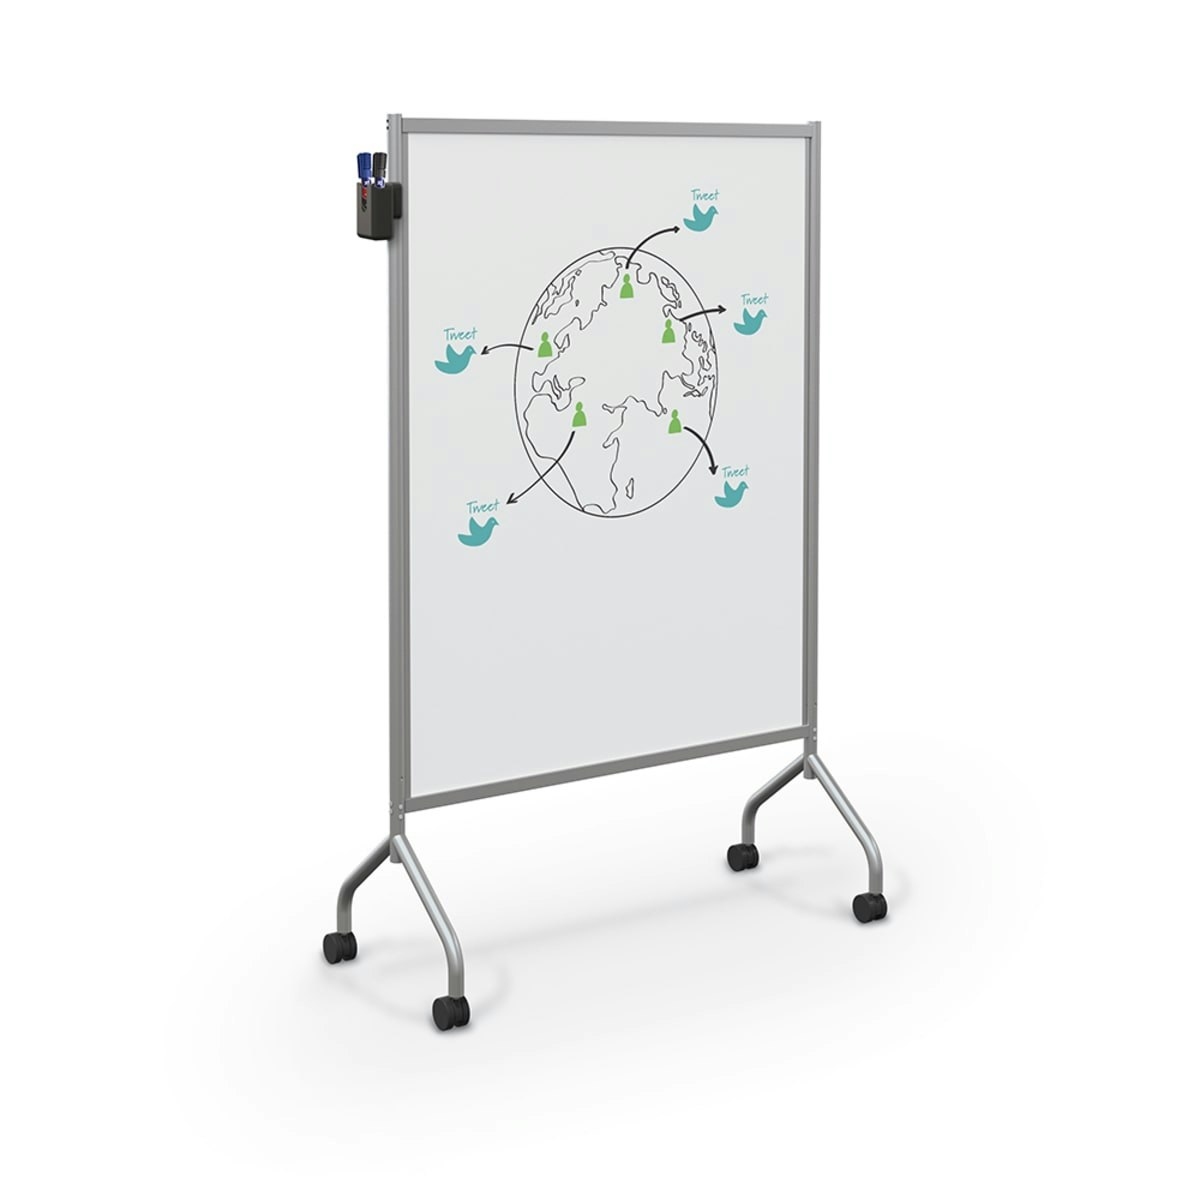 Weyoung Magnetic Whiteboard Mobile Dry Erase Board 40x28inch Flipchart Easel Stand White